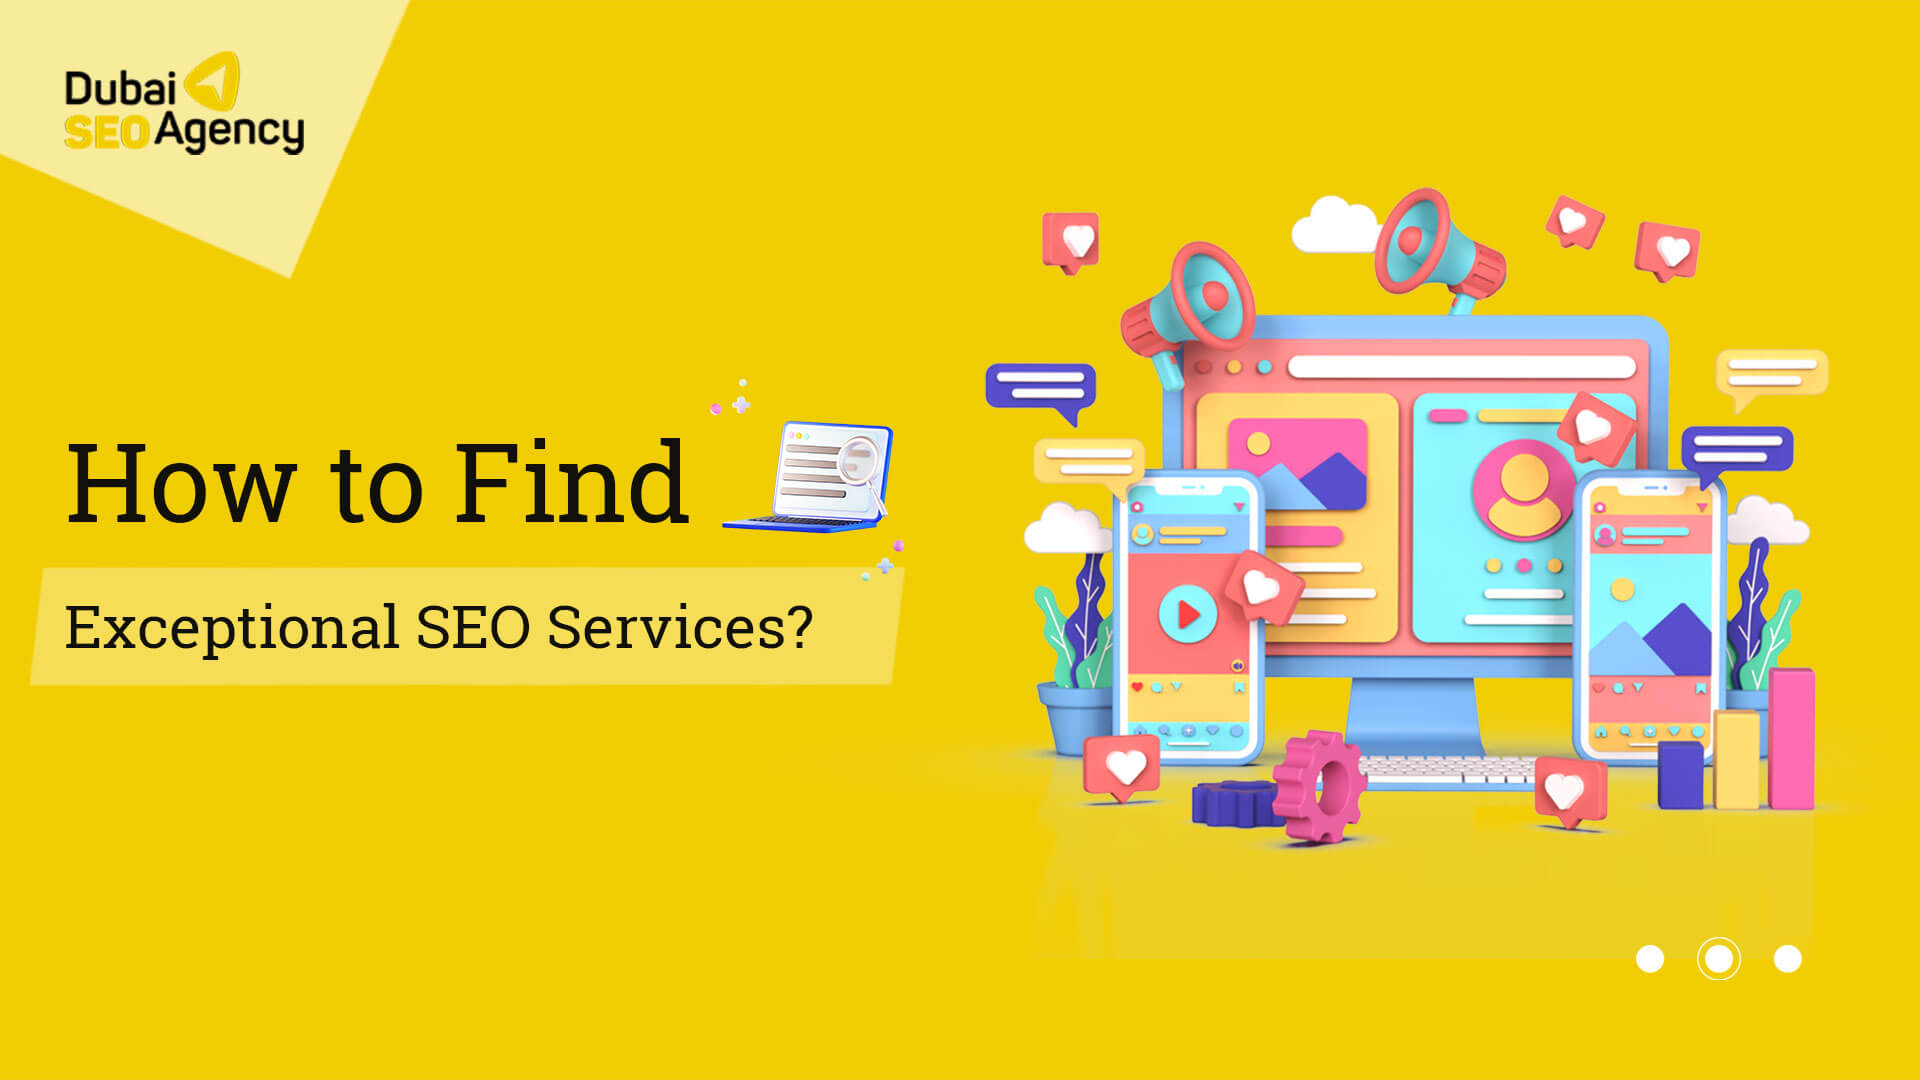 How to Find Exceptional SEO Services?